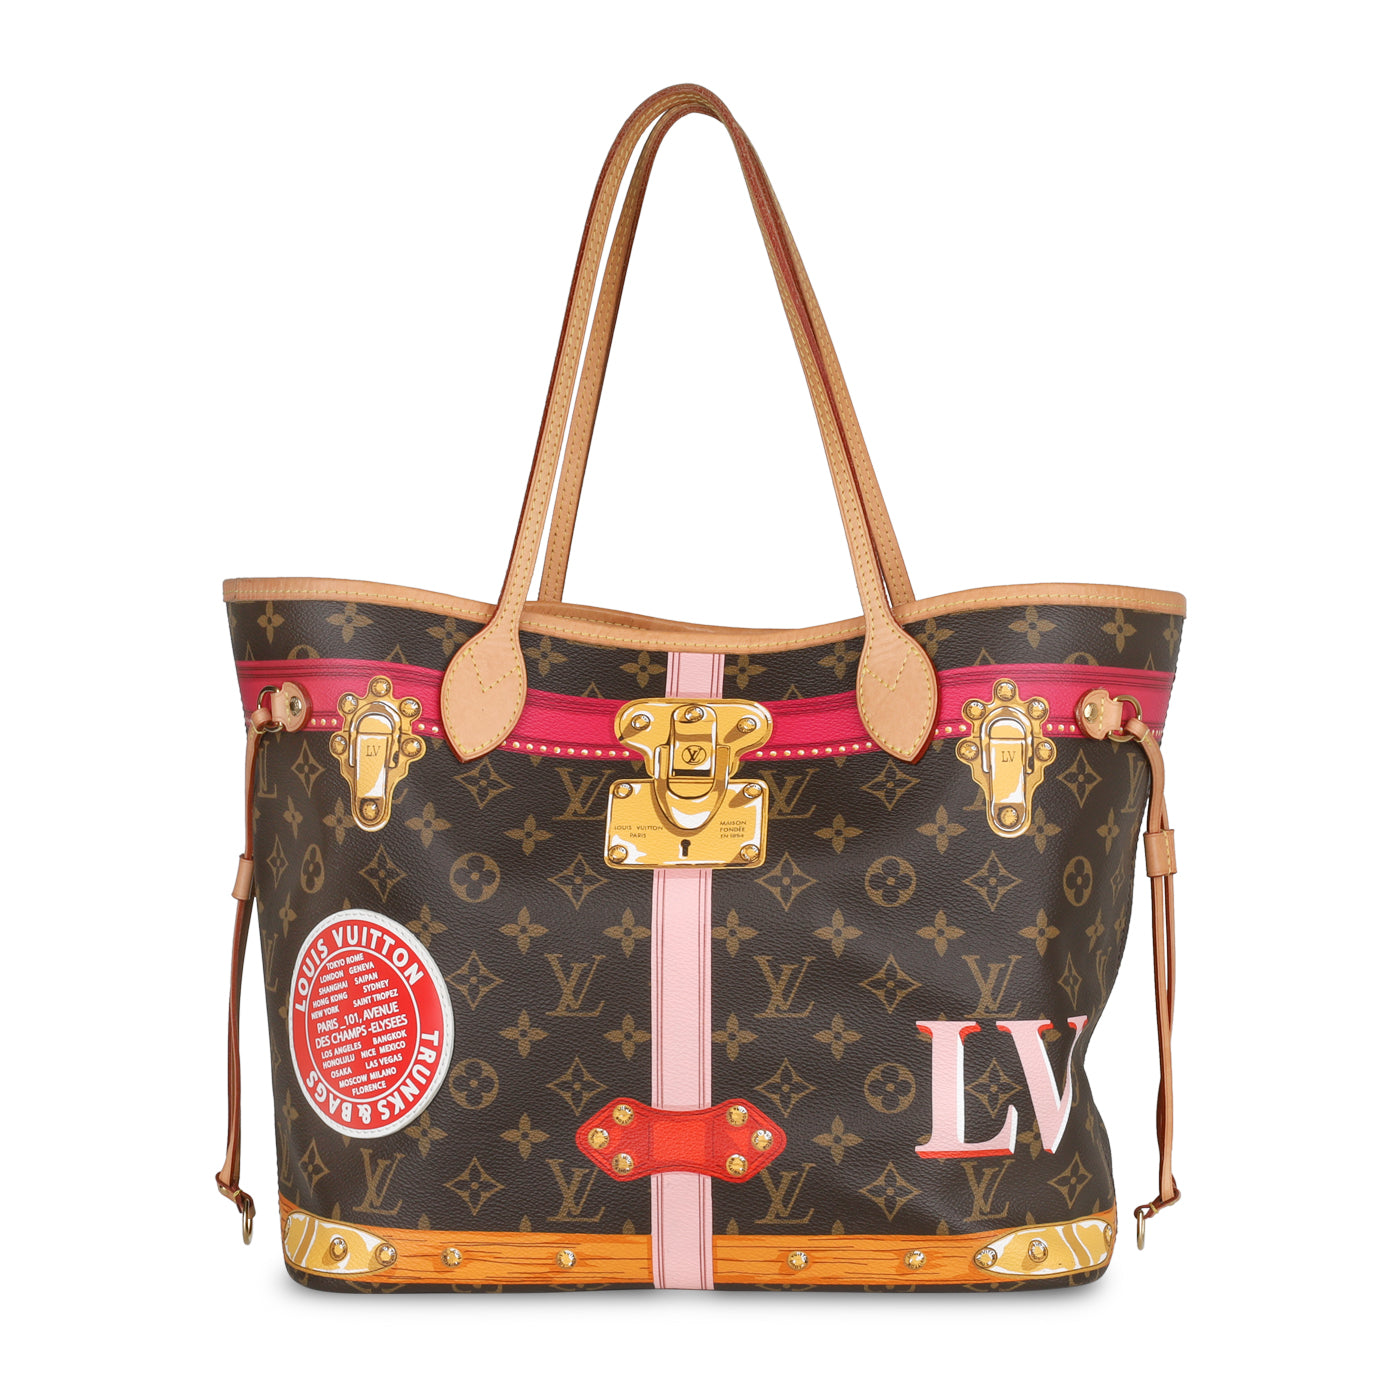 Louis Vuitton Monogram Summer Trunks Neo Neverfull MM w/ Pouch - Brown  Totes, Handbags - LOU750404